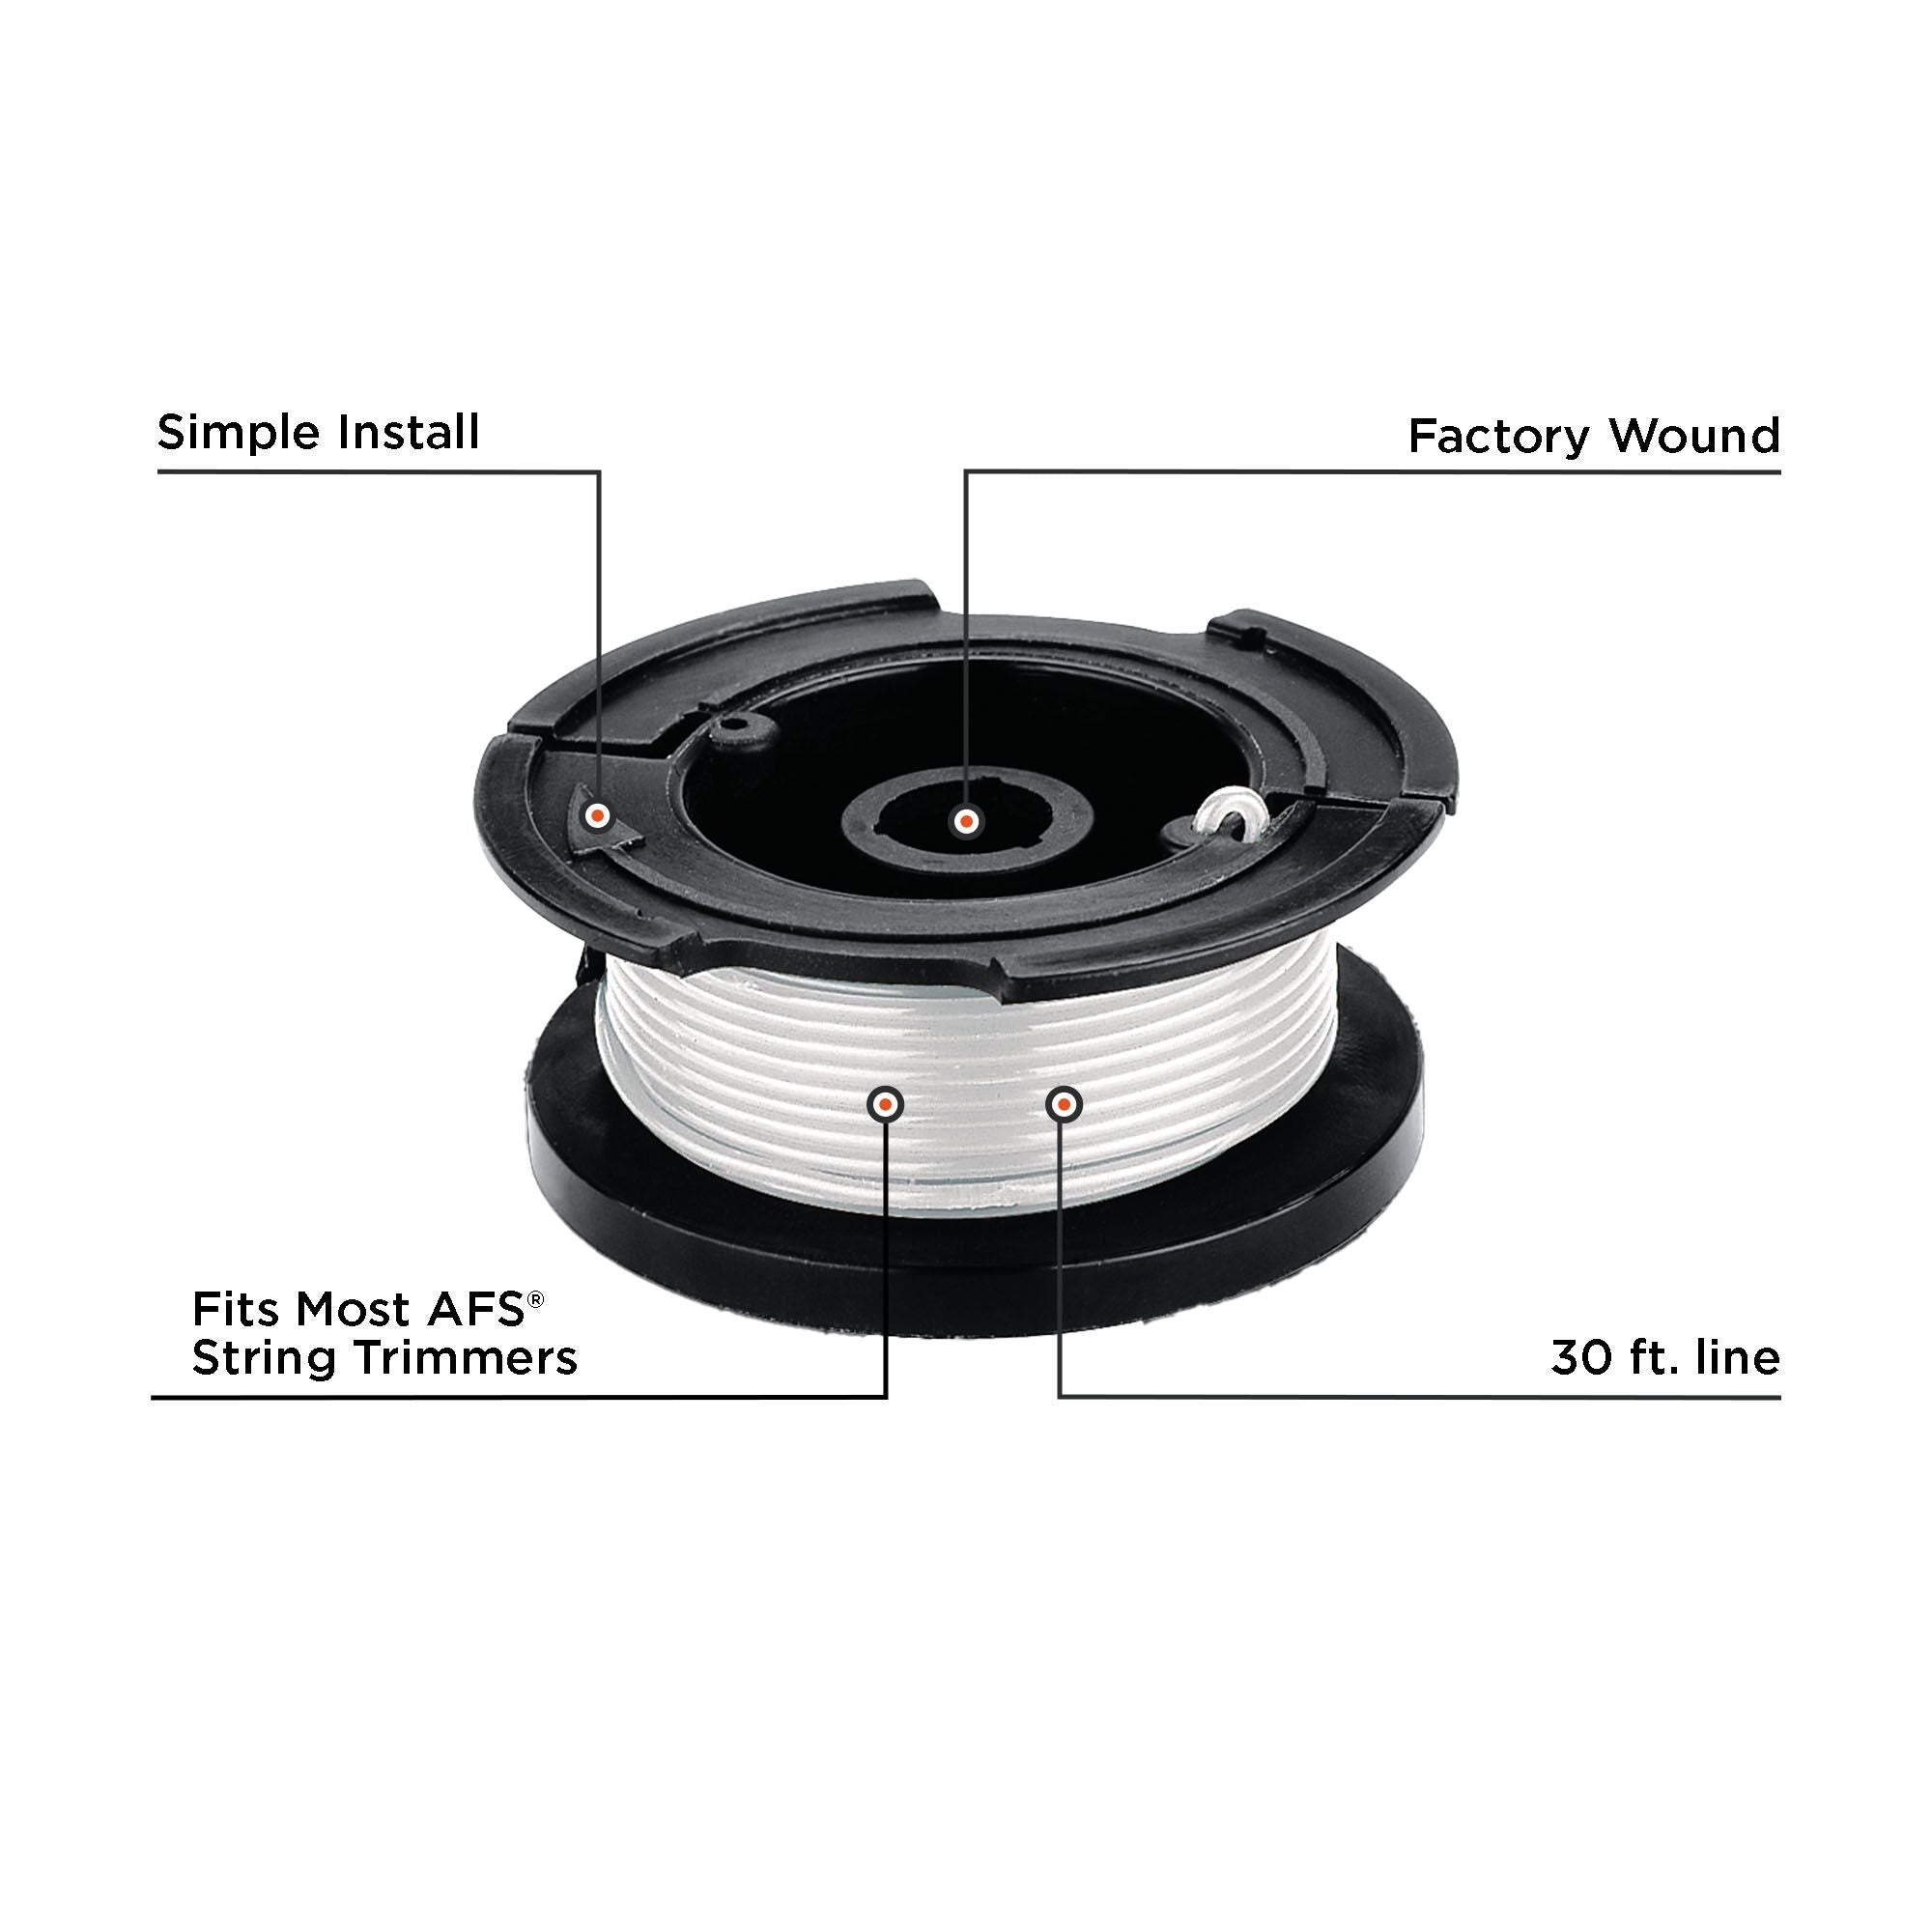 BLACK+DECKER Replacement Single Line Automatic Feed Spools AFS for Electric String Grass Trimmer/Edger (3-Pack).  Simple install, factory wound, fits most AFS string trimmers.